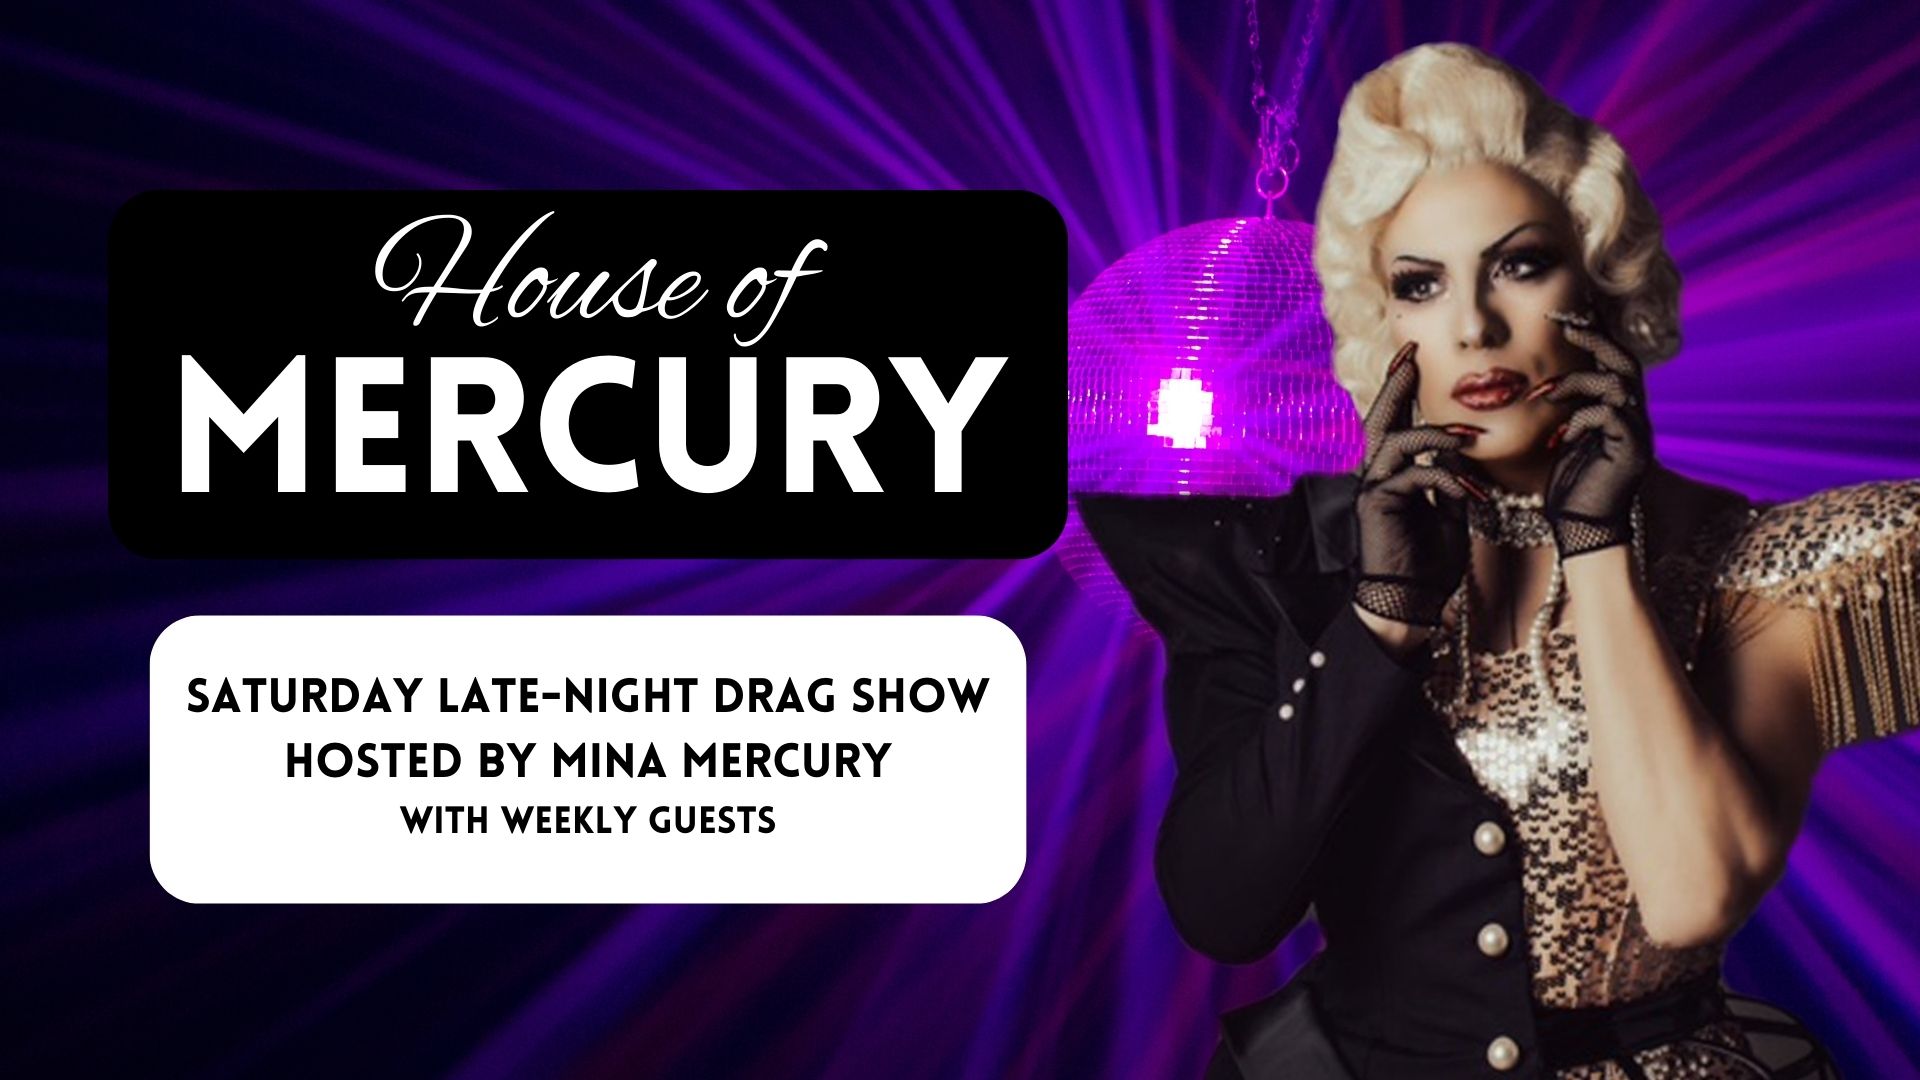 A poster with a disco part background and drag Queen Mina Mercury posing in the foreground. Text reads: House of Mercury, Saturday Late Night Drag Show with Weekly Guests